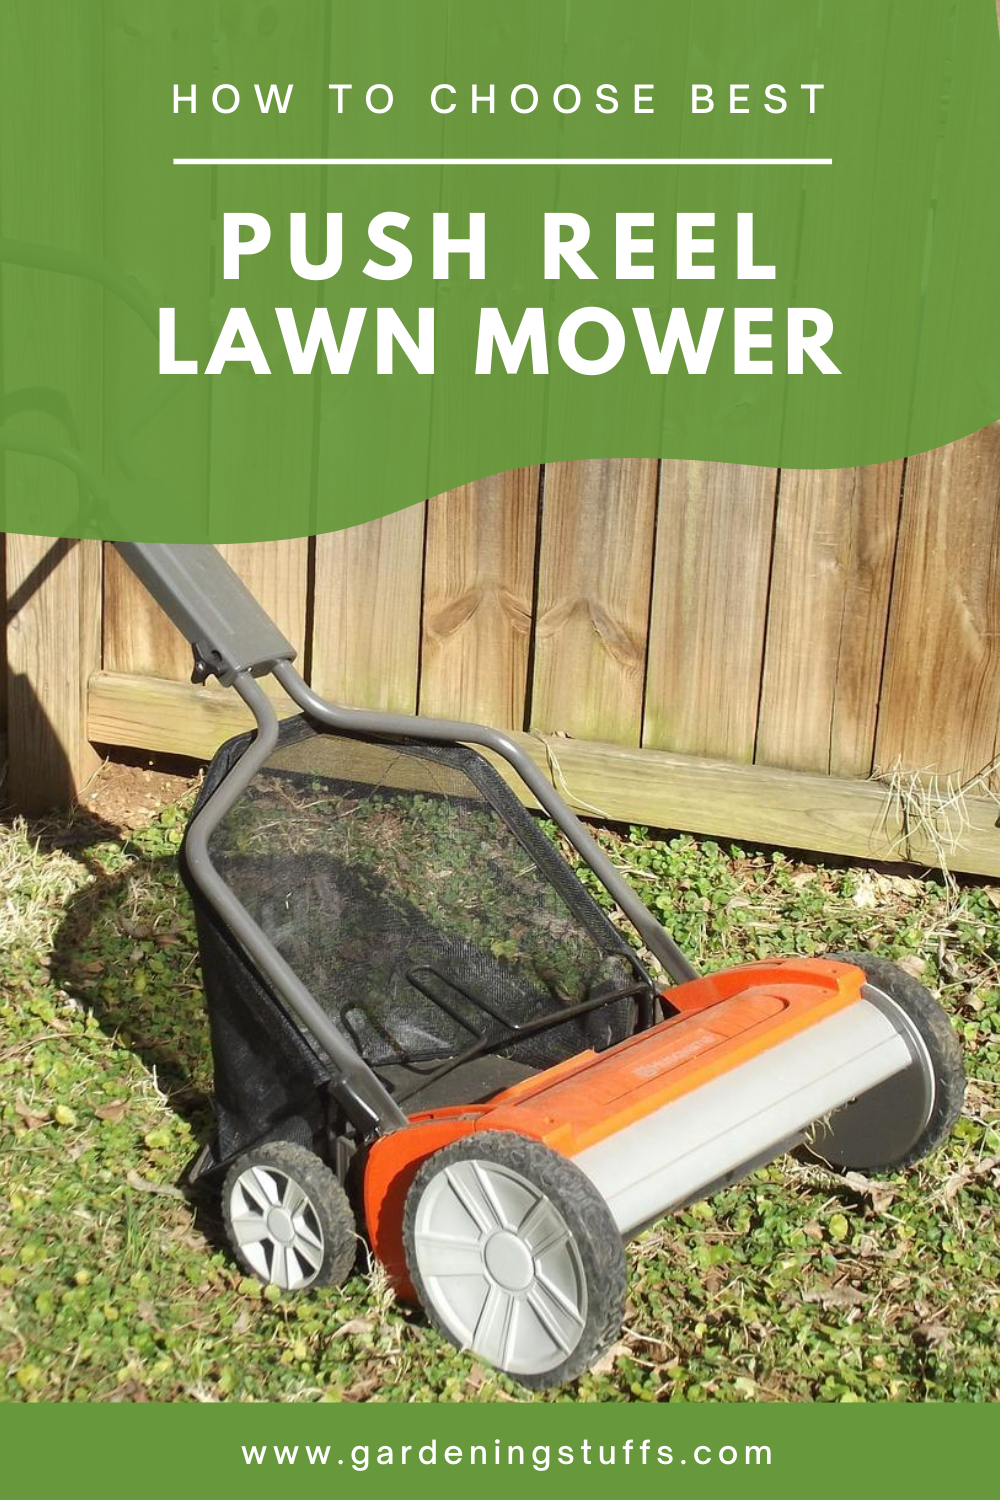 If you’ve decided to buy a push reel lawn mower. Here are some essential criteria to consider when deciding over the reel mower unit to buy and the reasons why it’s better to have push reel lawn mower than a gas-powered mower.